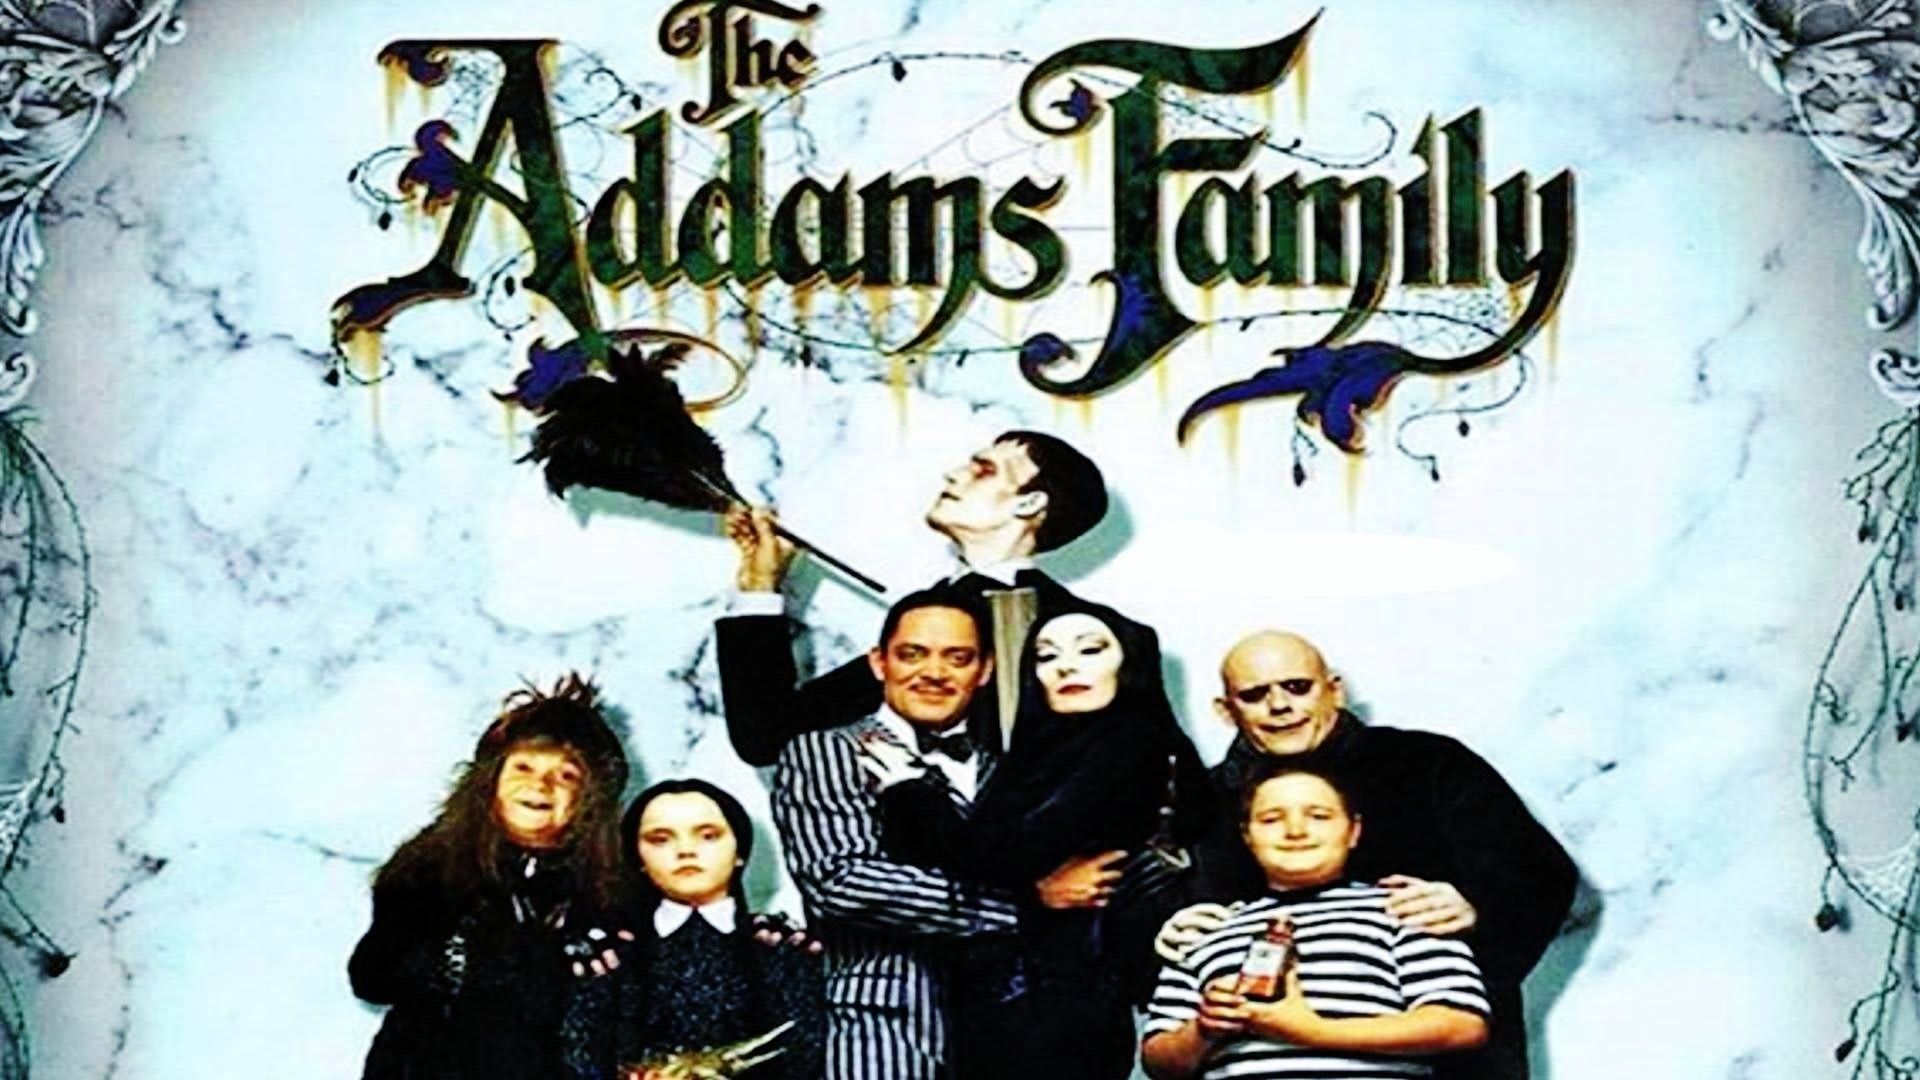 The Addams Family Family 1991 Poster HD Wallpaper